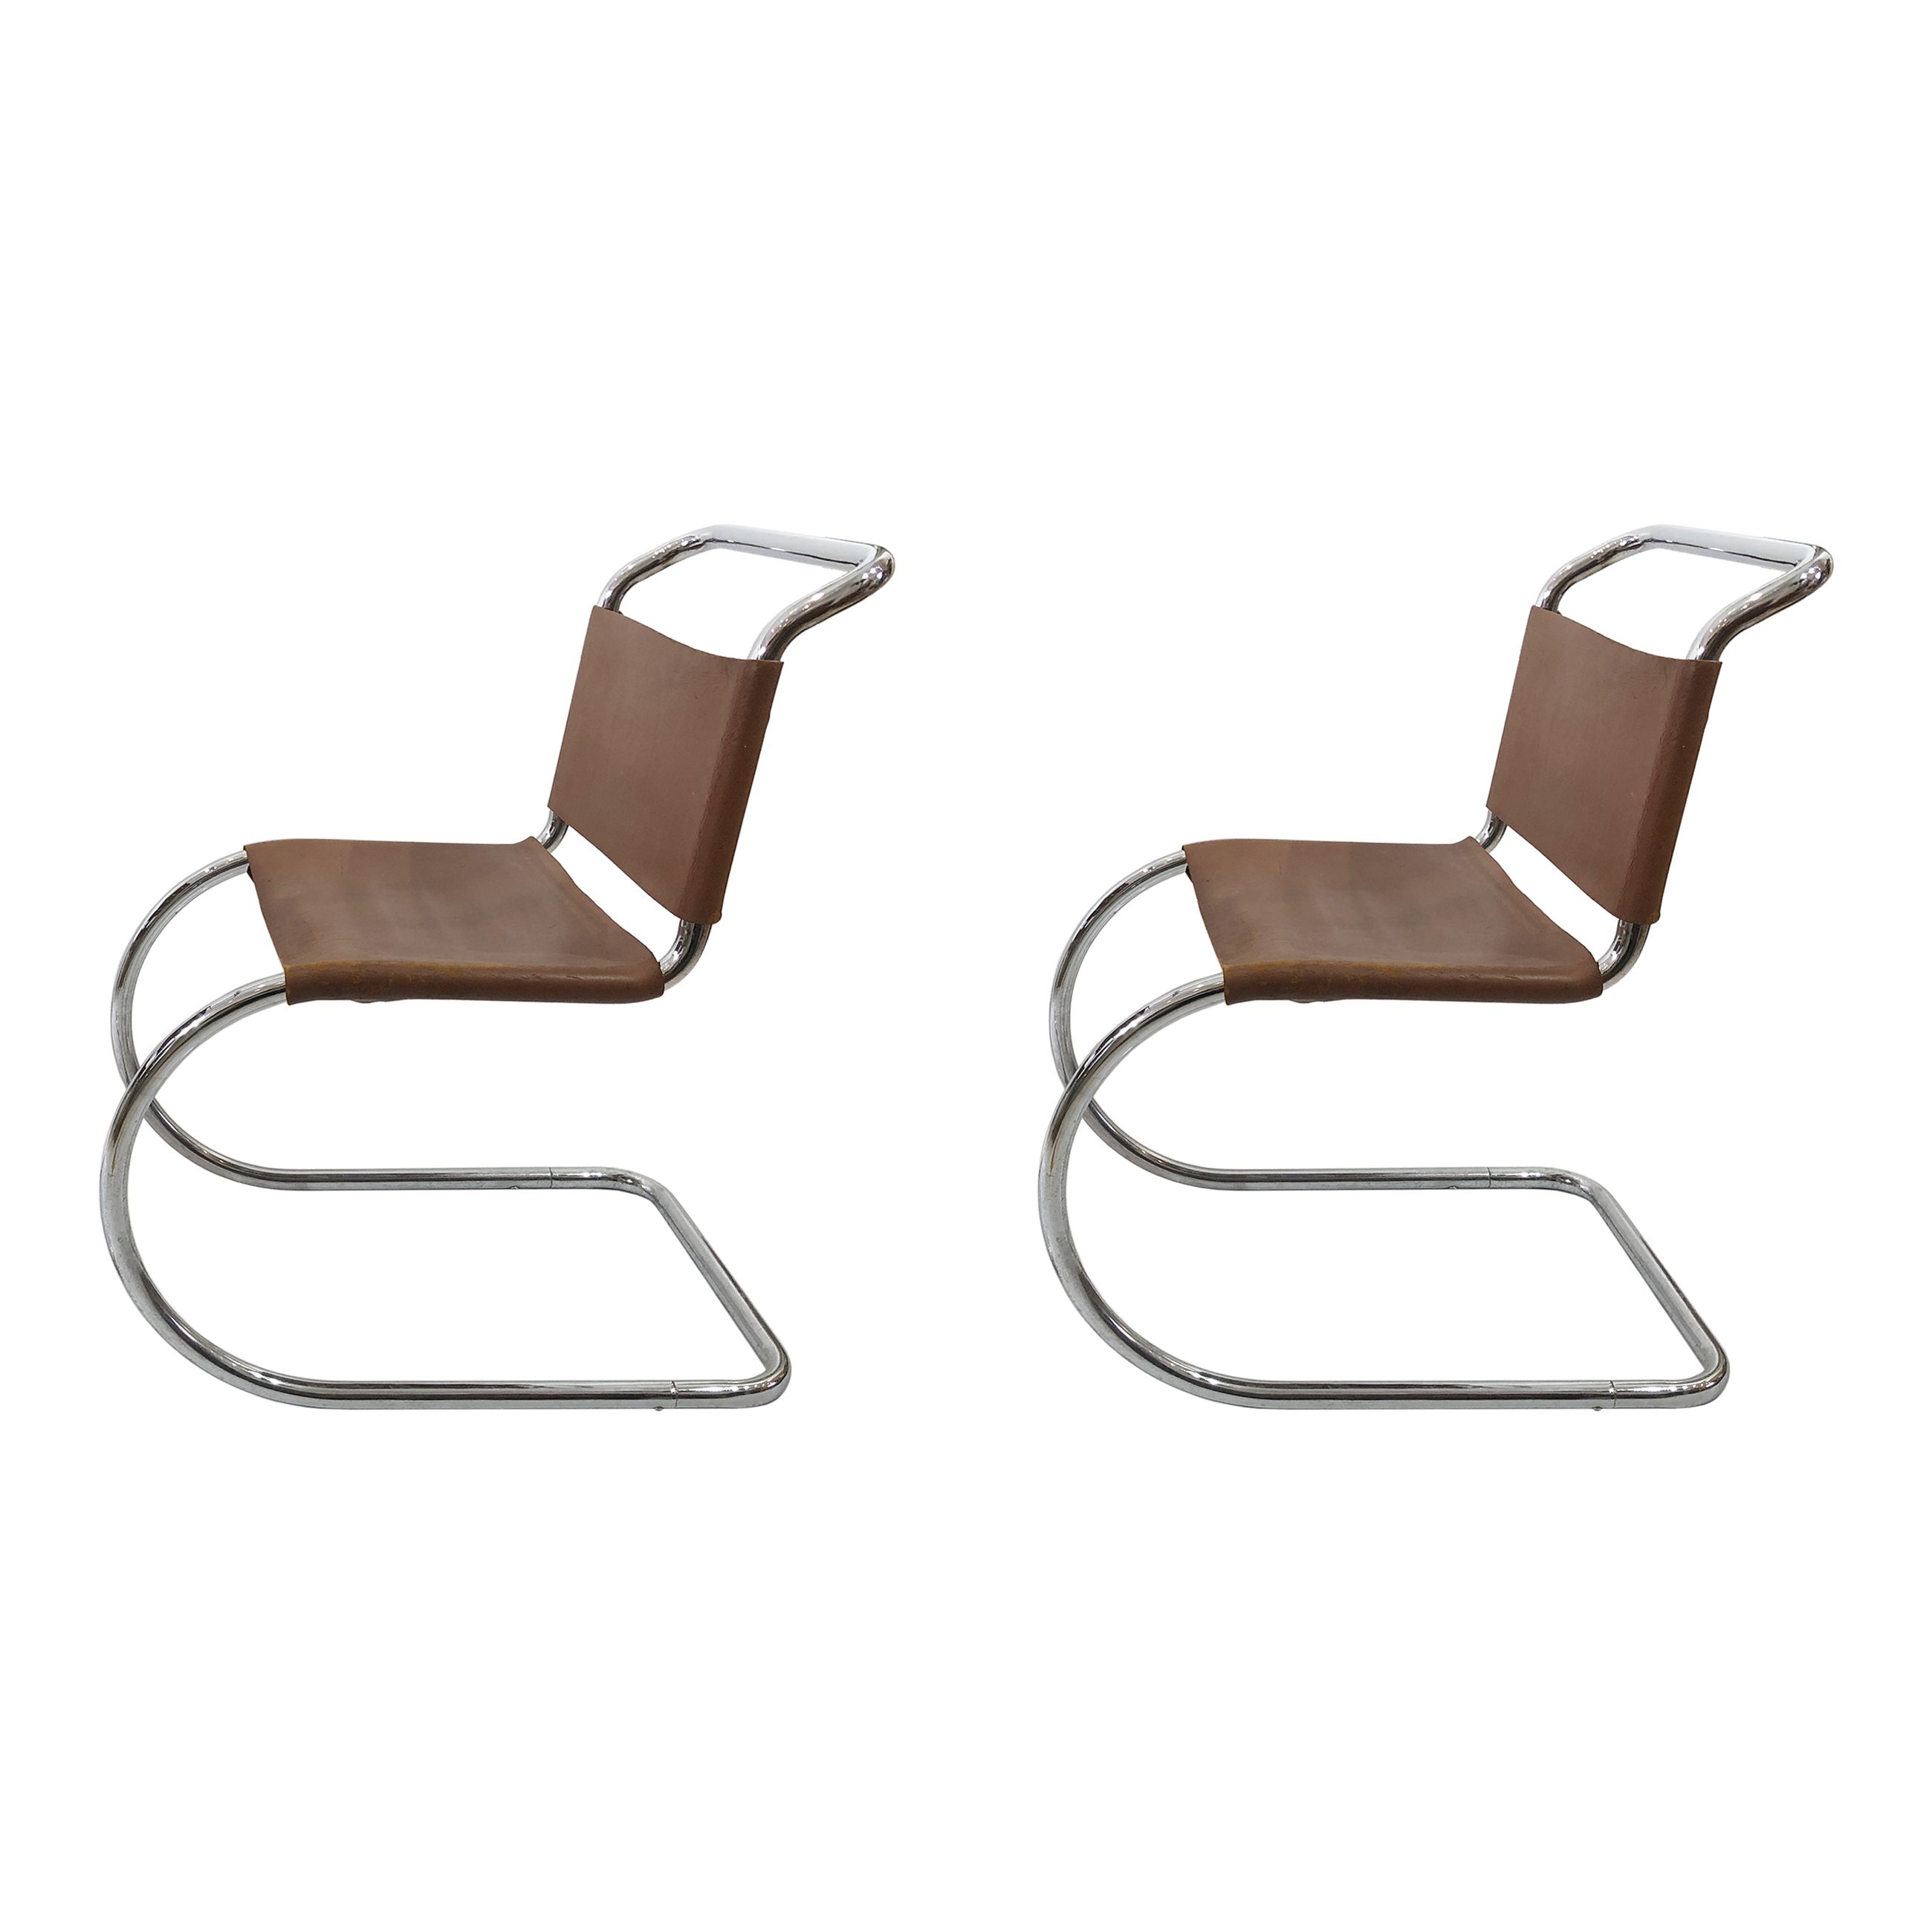 Chrome Dining Chairs, Vintage Leather And Chrome Dining Chairs